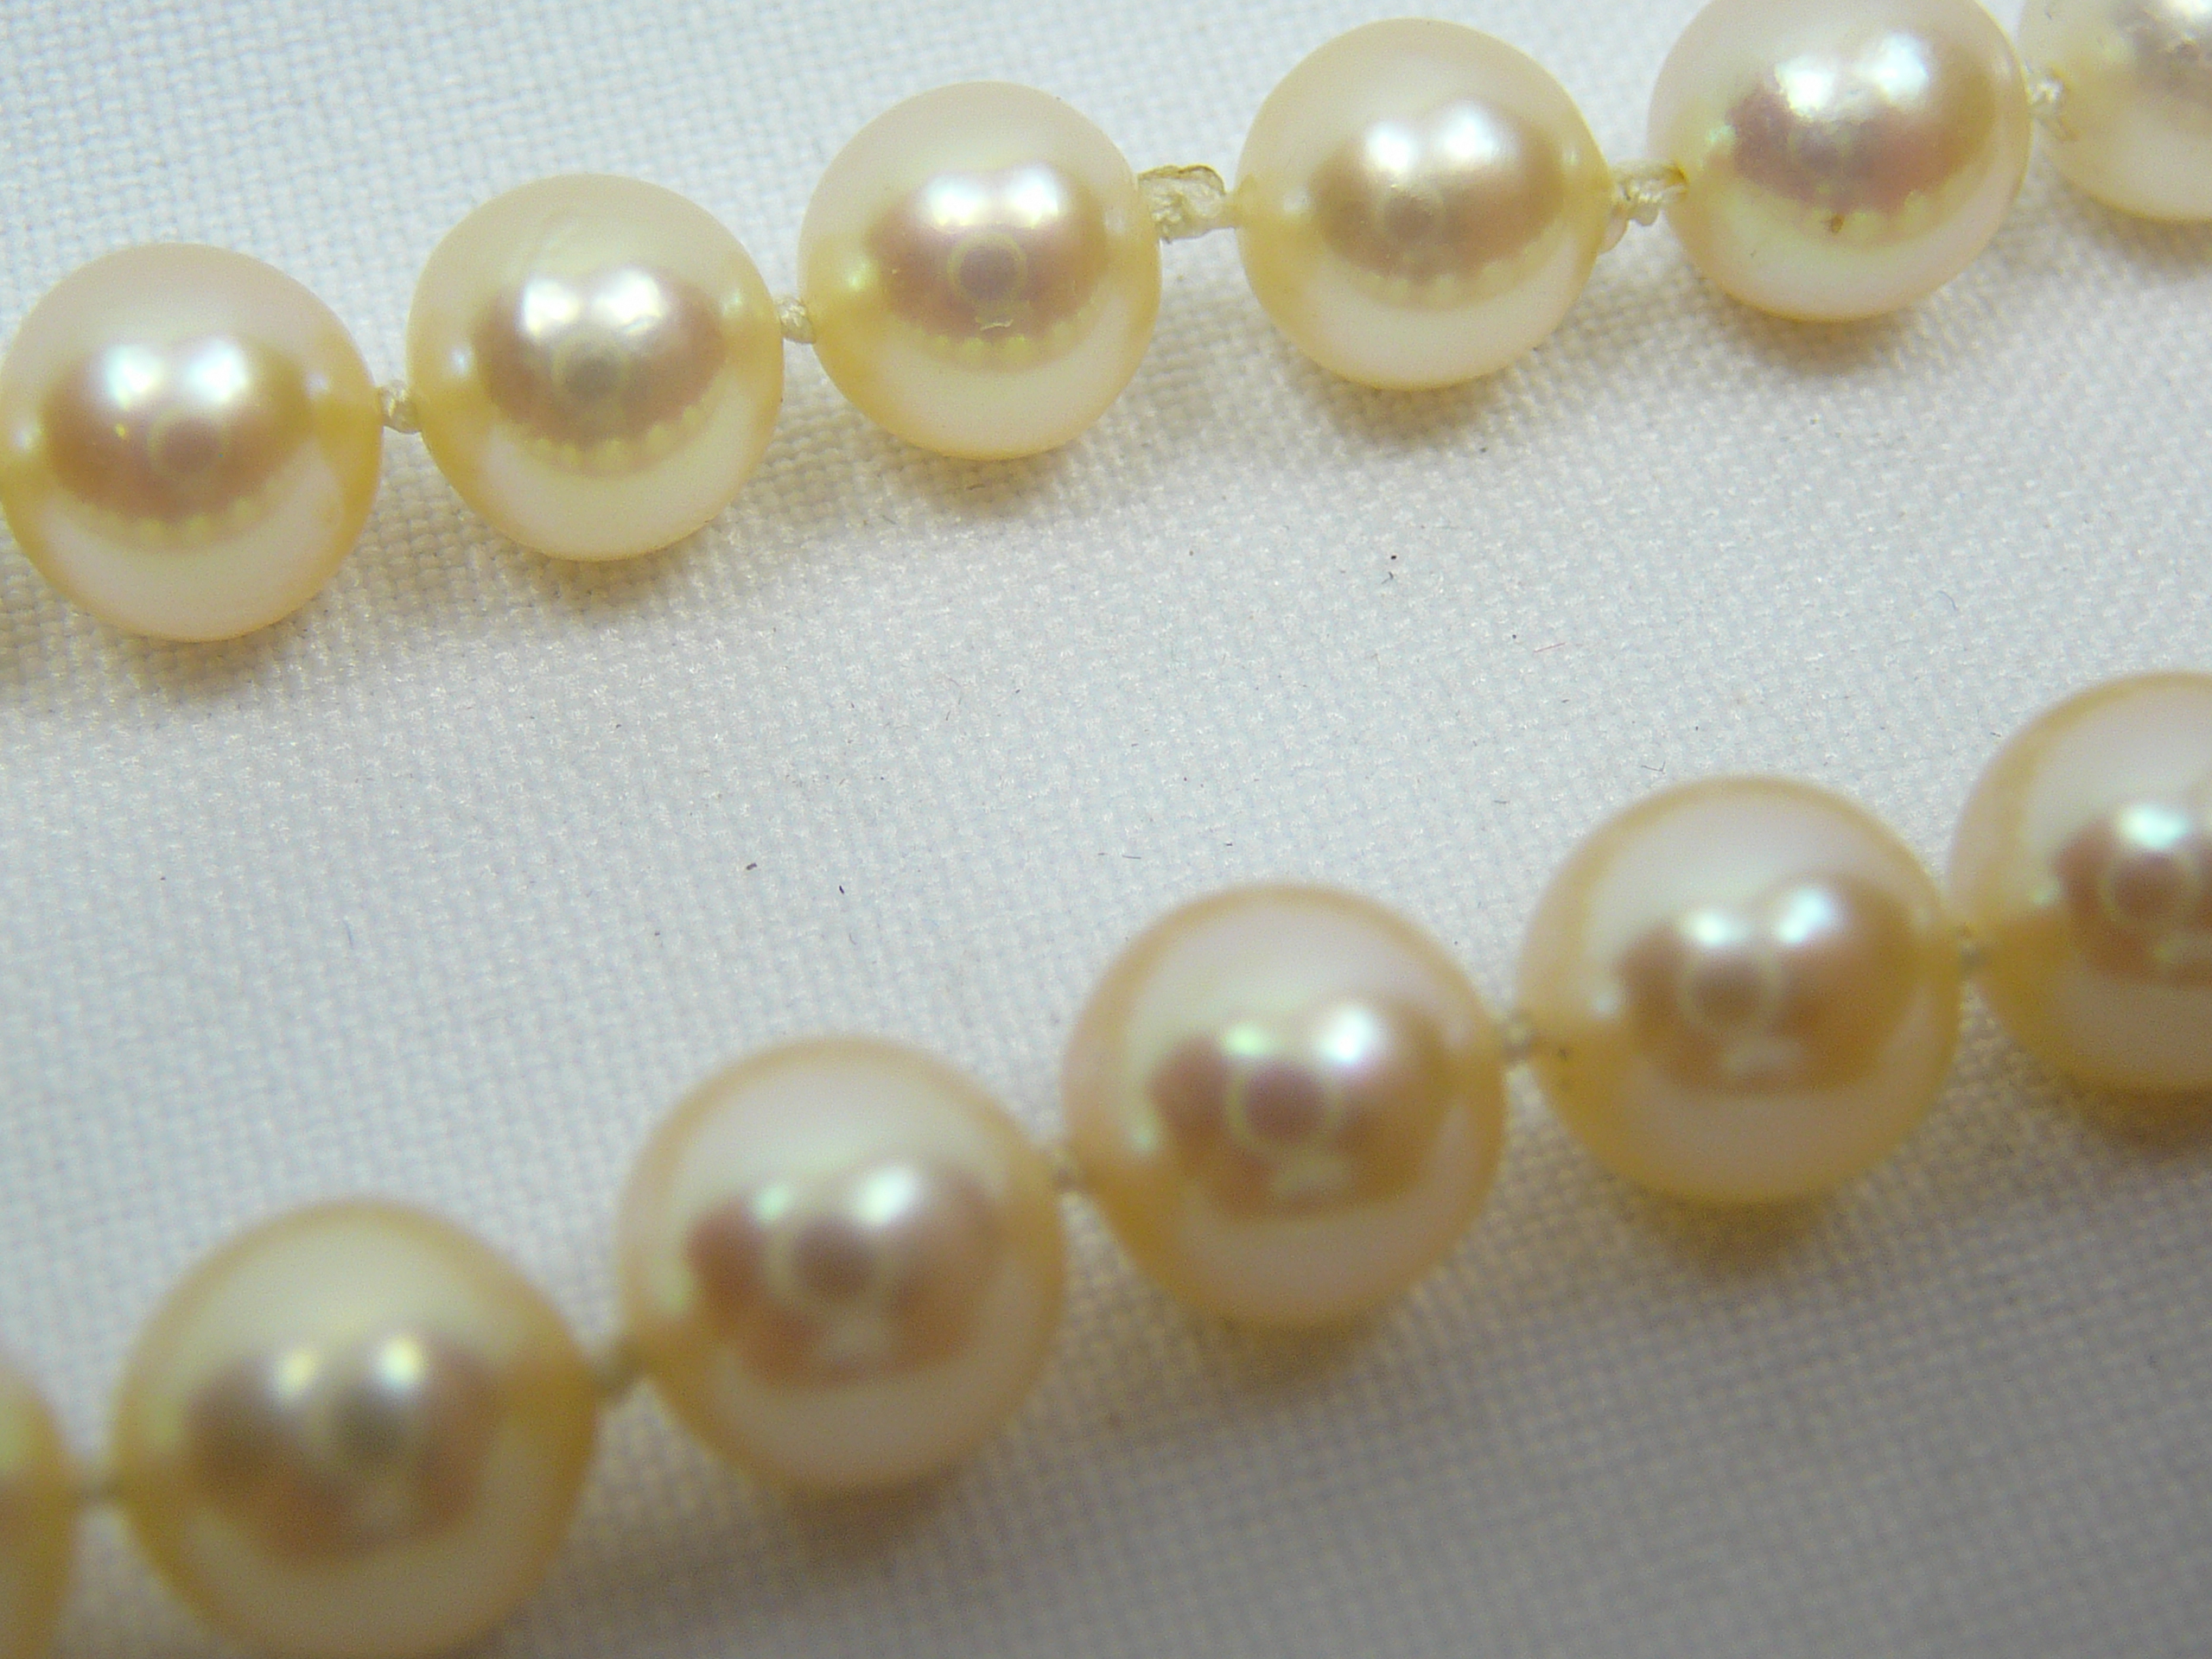 18ct diamond pearl necklace - Image 2 of 4